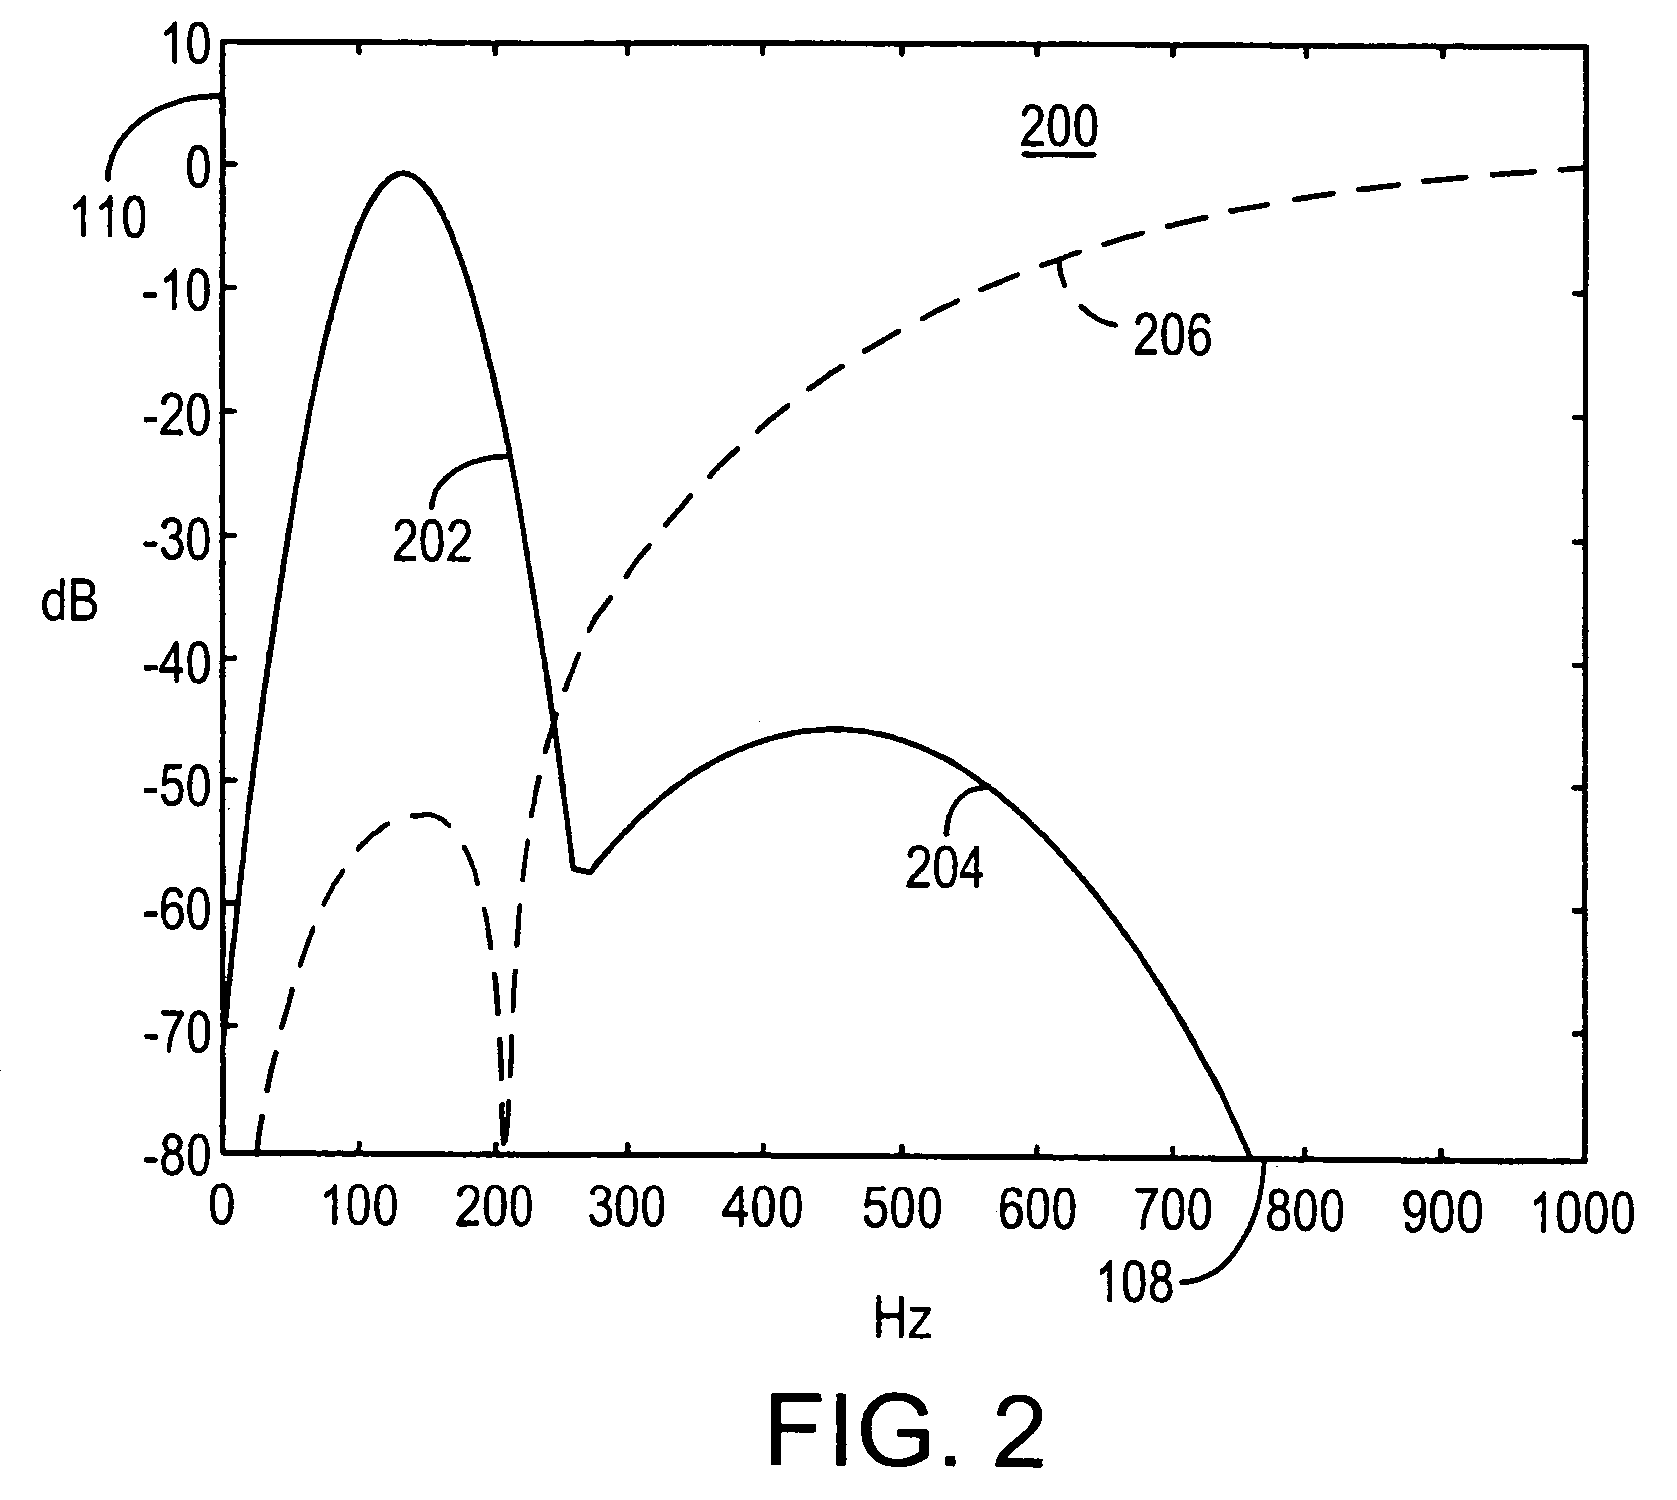 Ultrasound clutter filtering with iterative high pass filter selection